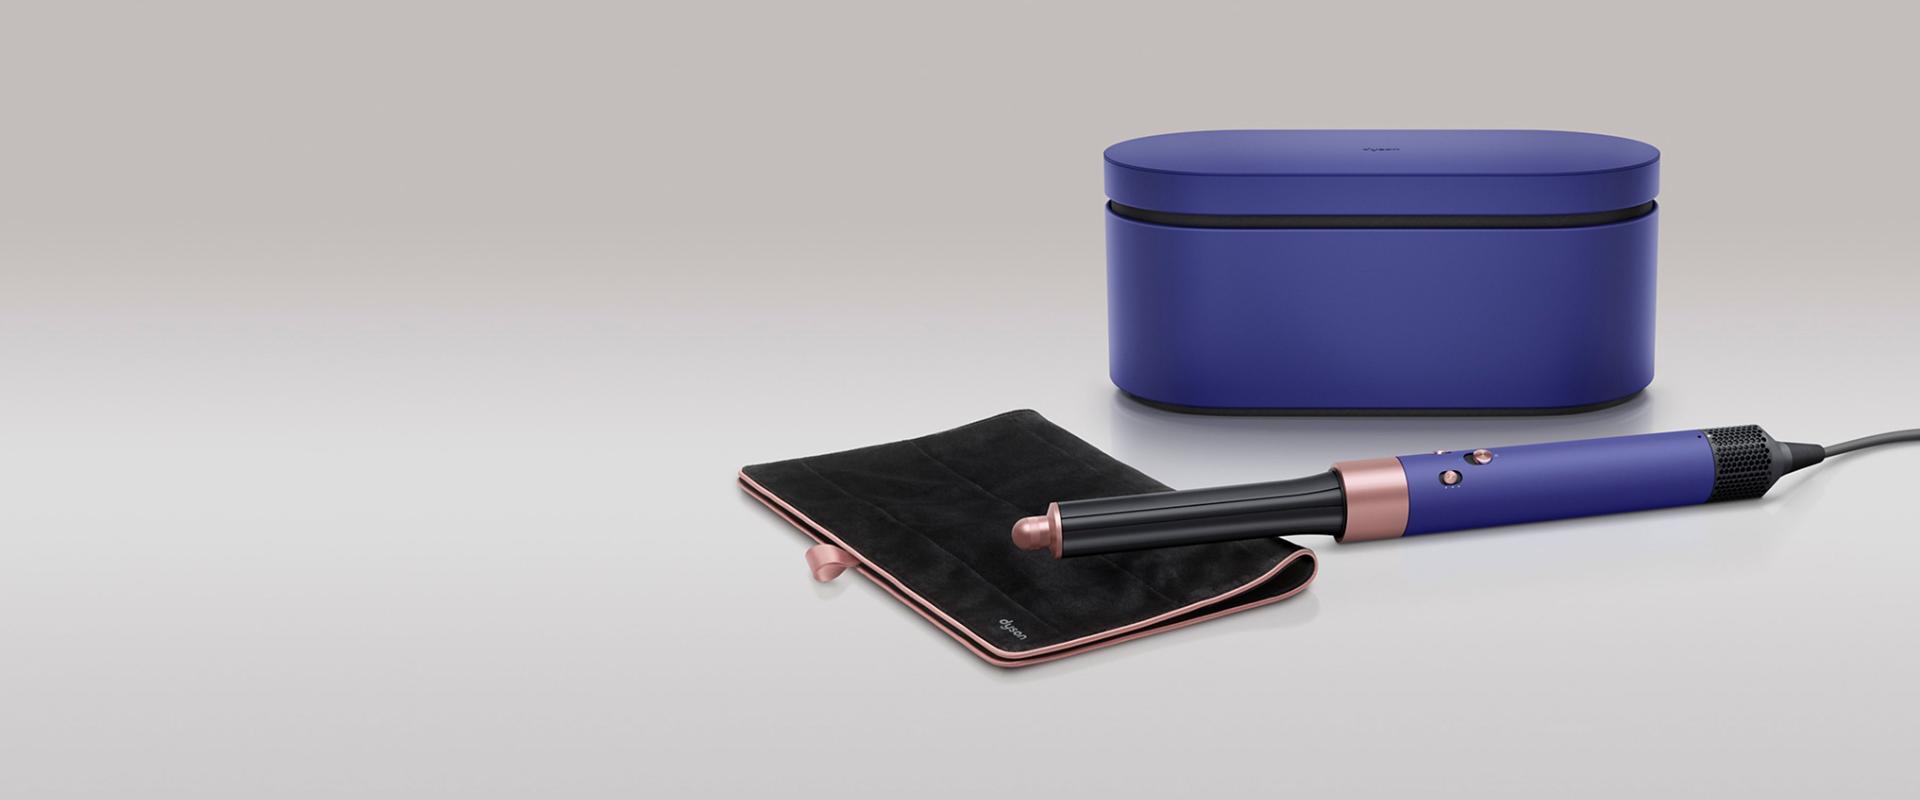 Dyson Airwrap multi-styler in Vinca blue and Rosé with travel pouch.